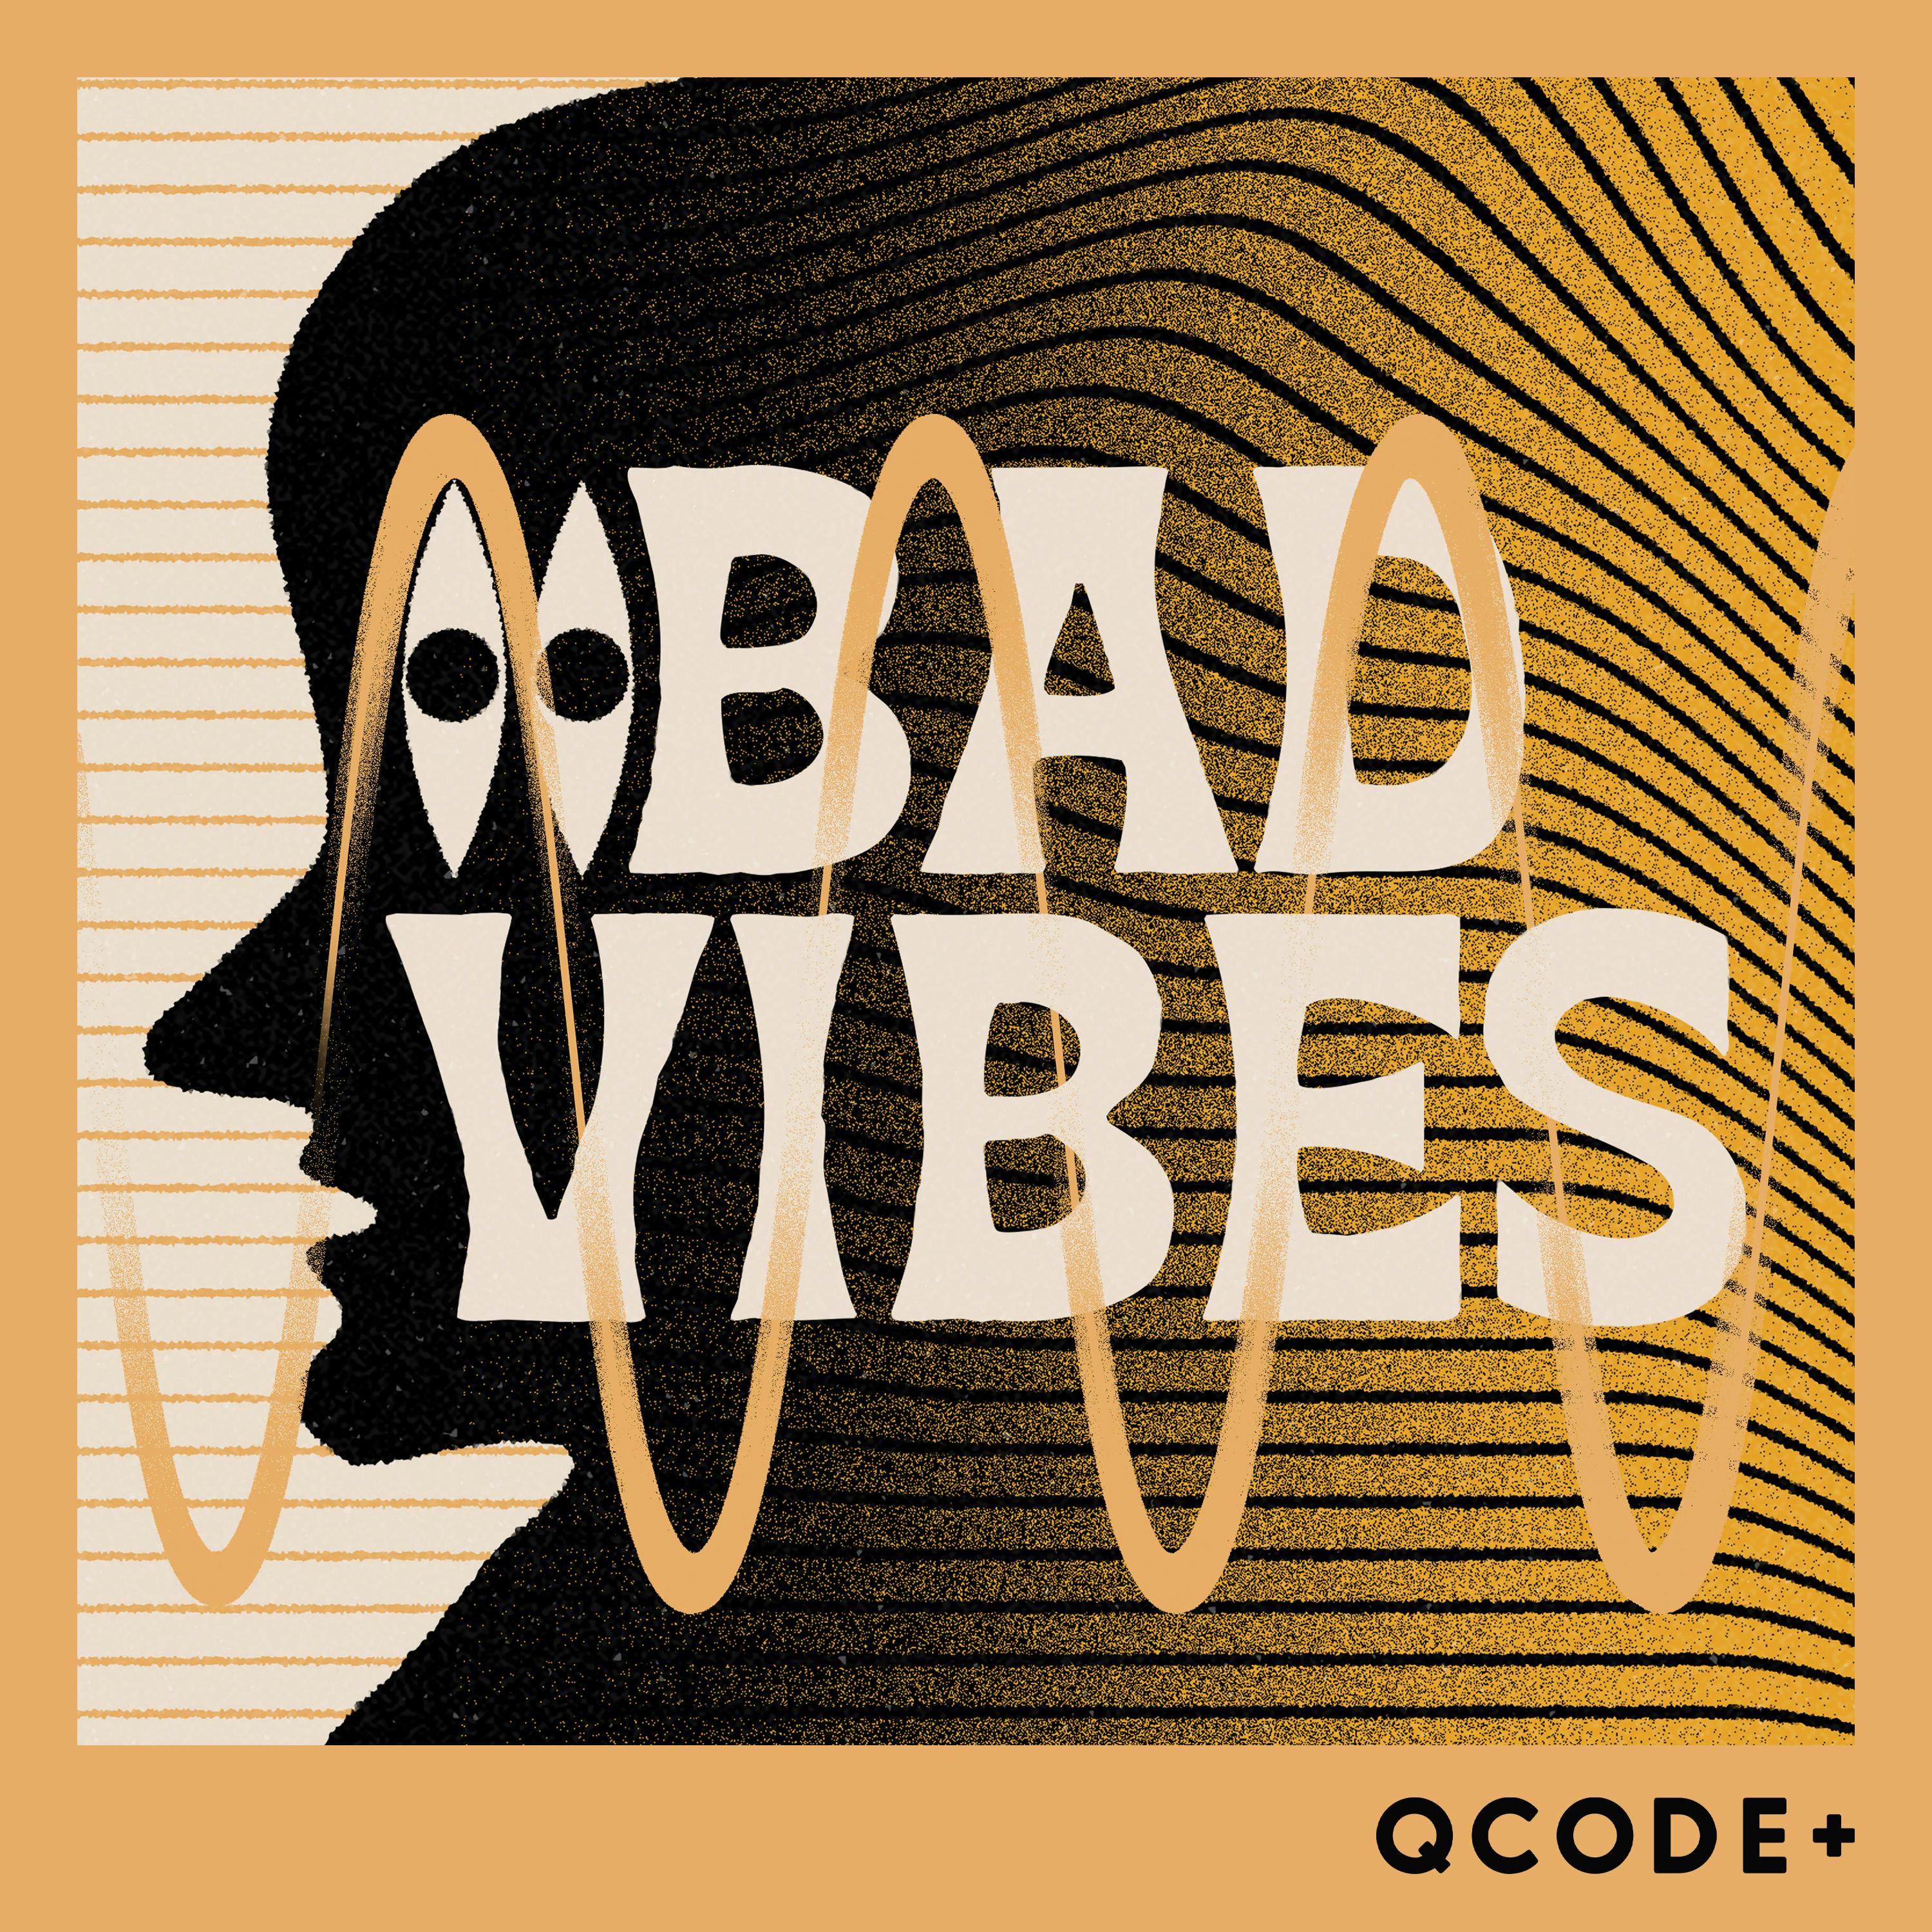 Bad Vibes — QCODE+ podcast tile